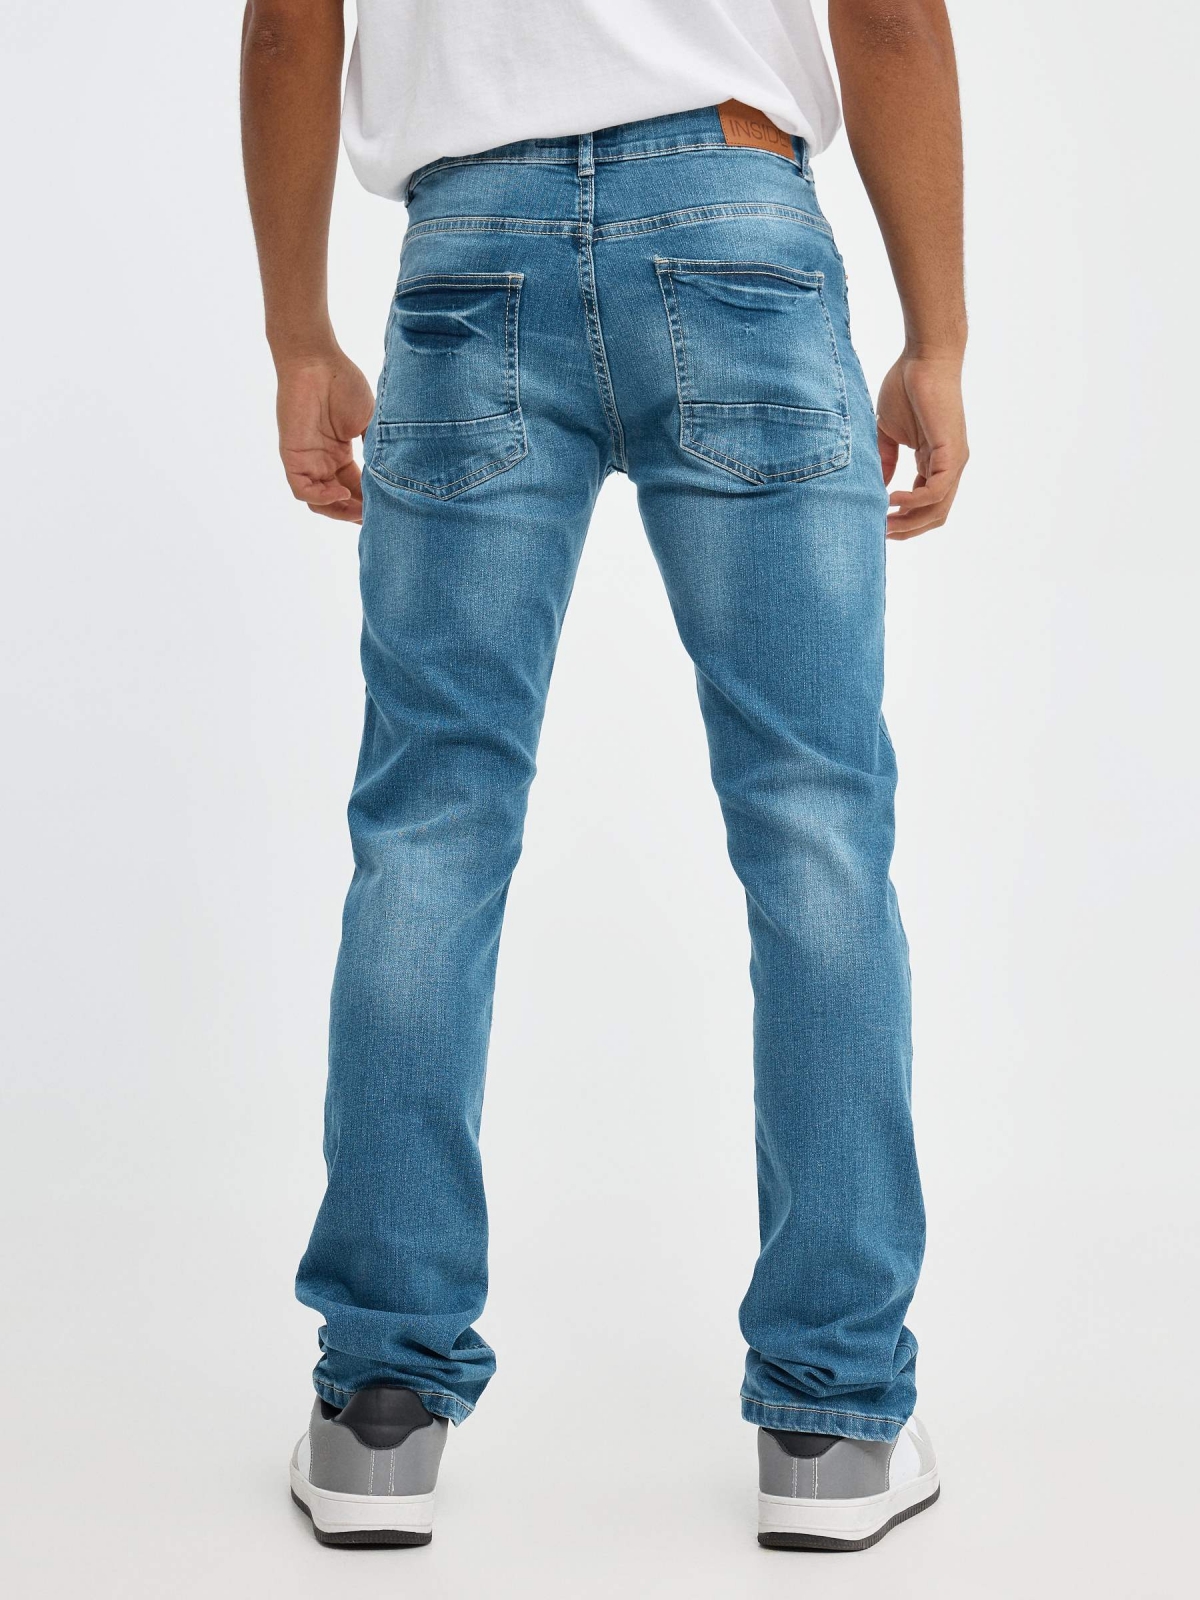 Basic blue jeans blue middle back view